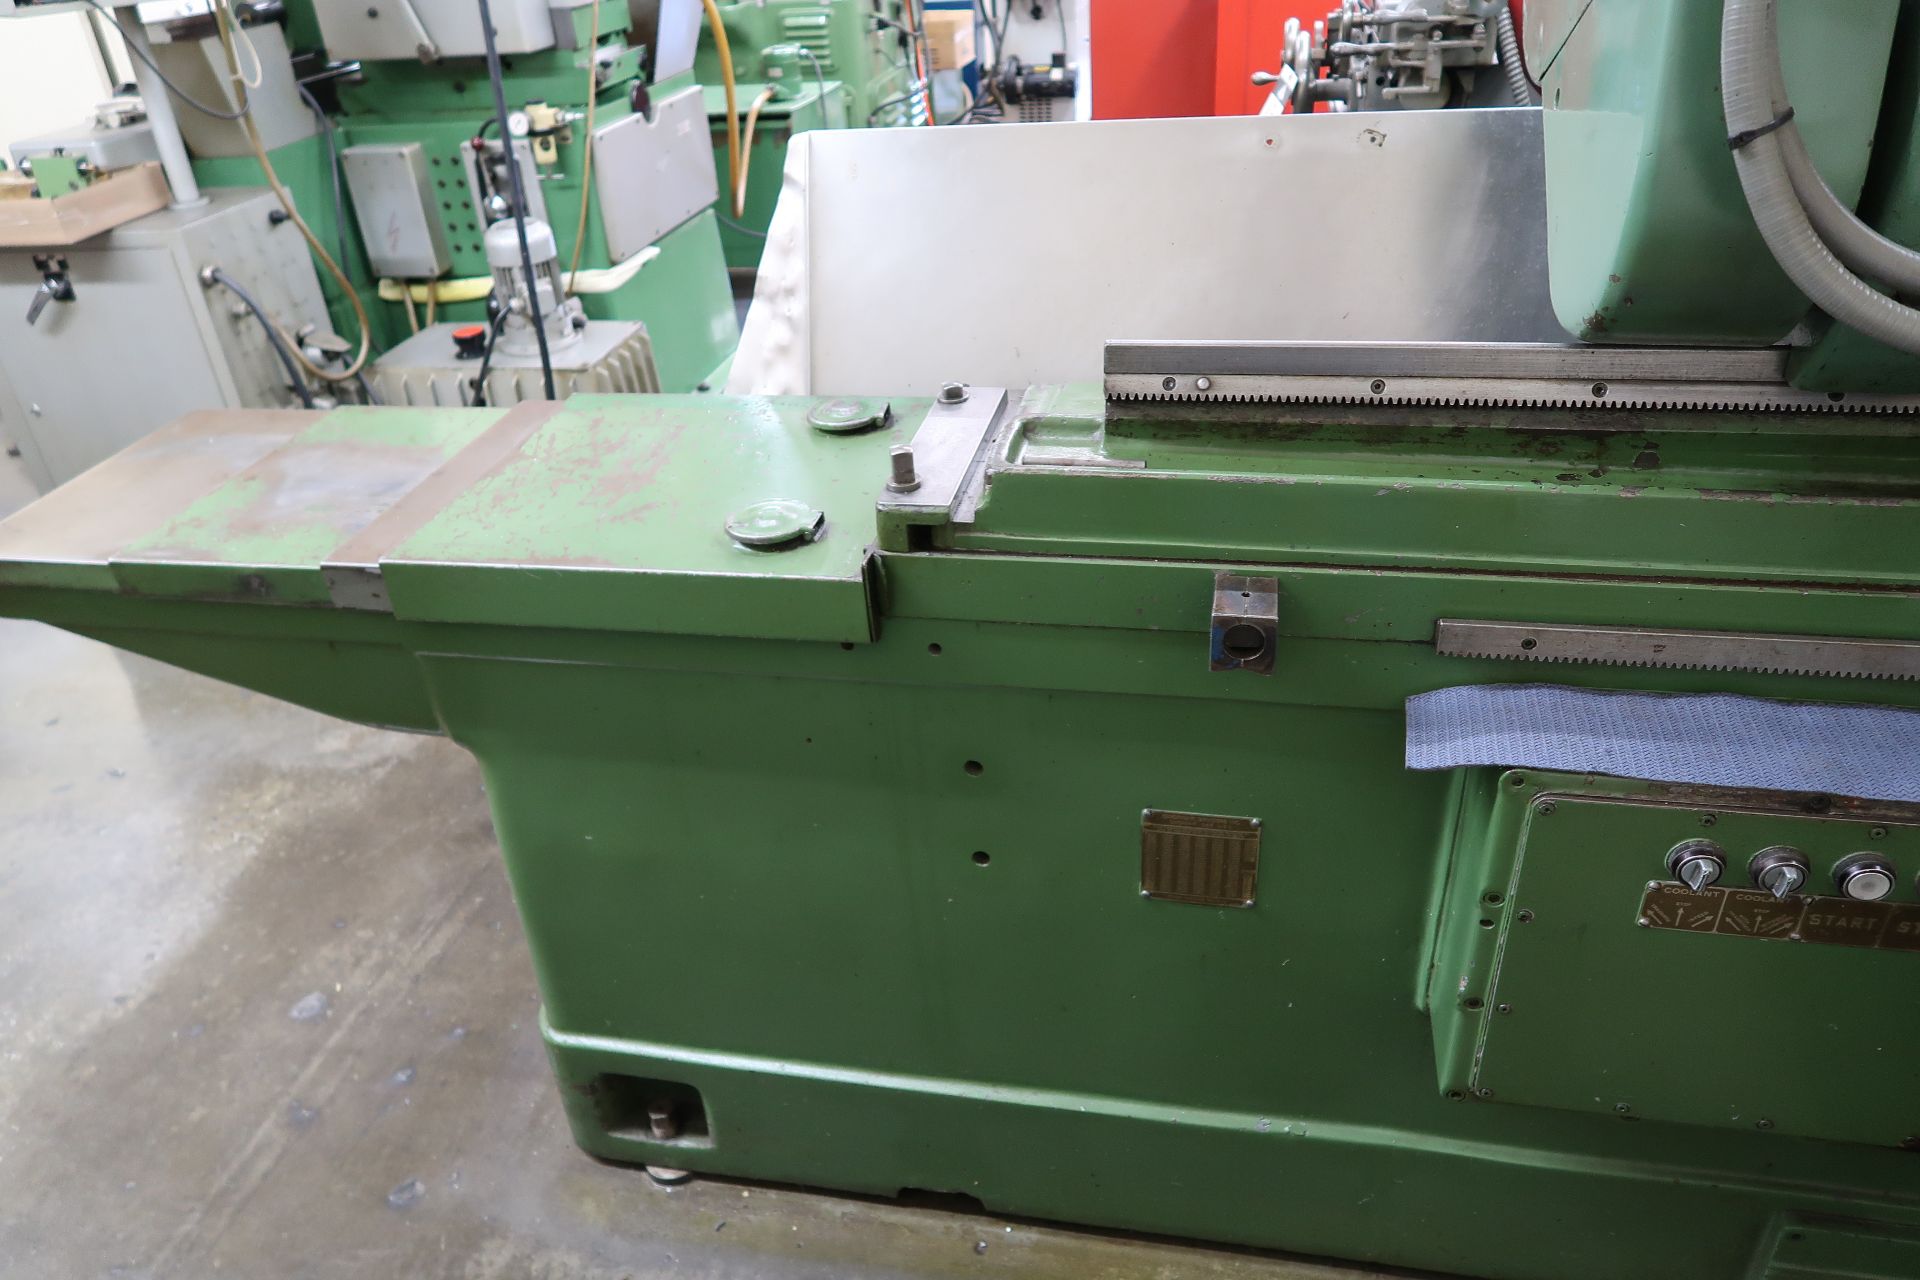 Cincinnati 10” x 48” Automatic Cylindrical Grinder s/n 3P25A-4 w/ Motorized Work Head, SOLD AS IS - Image 4 of 16